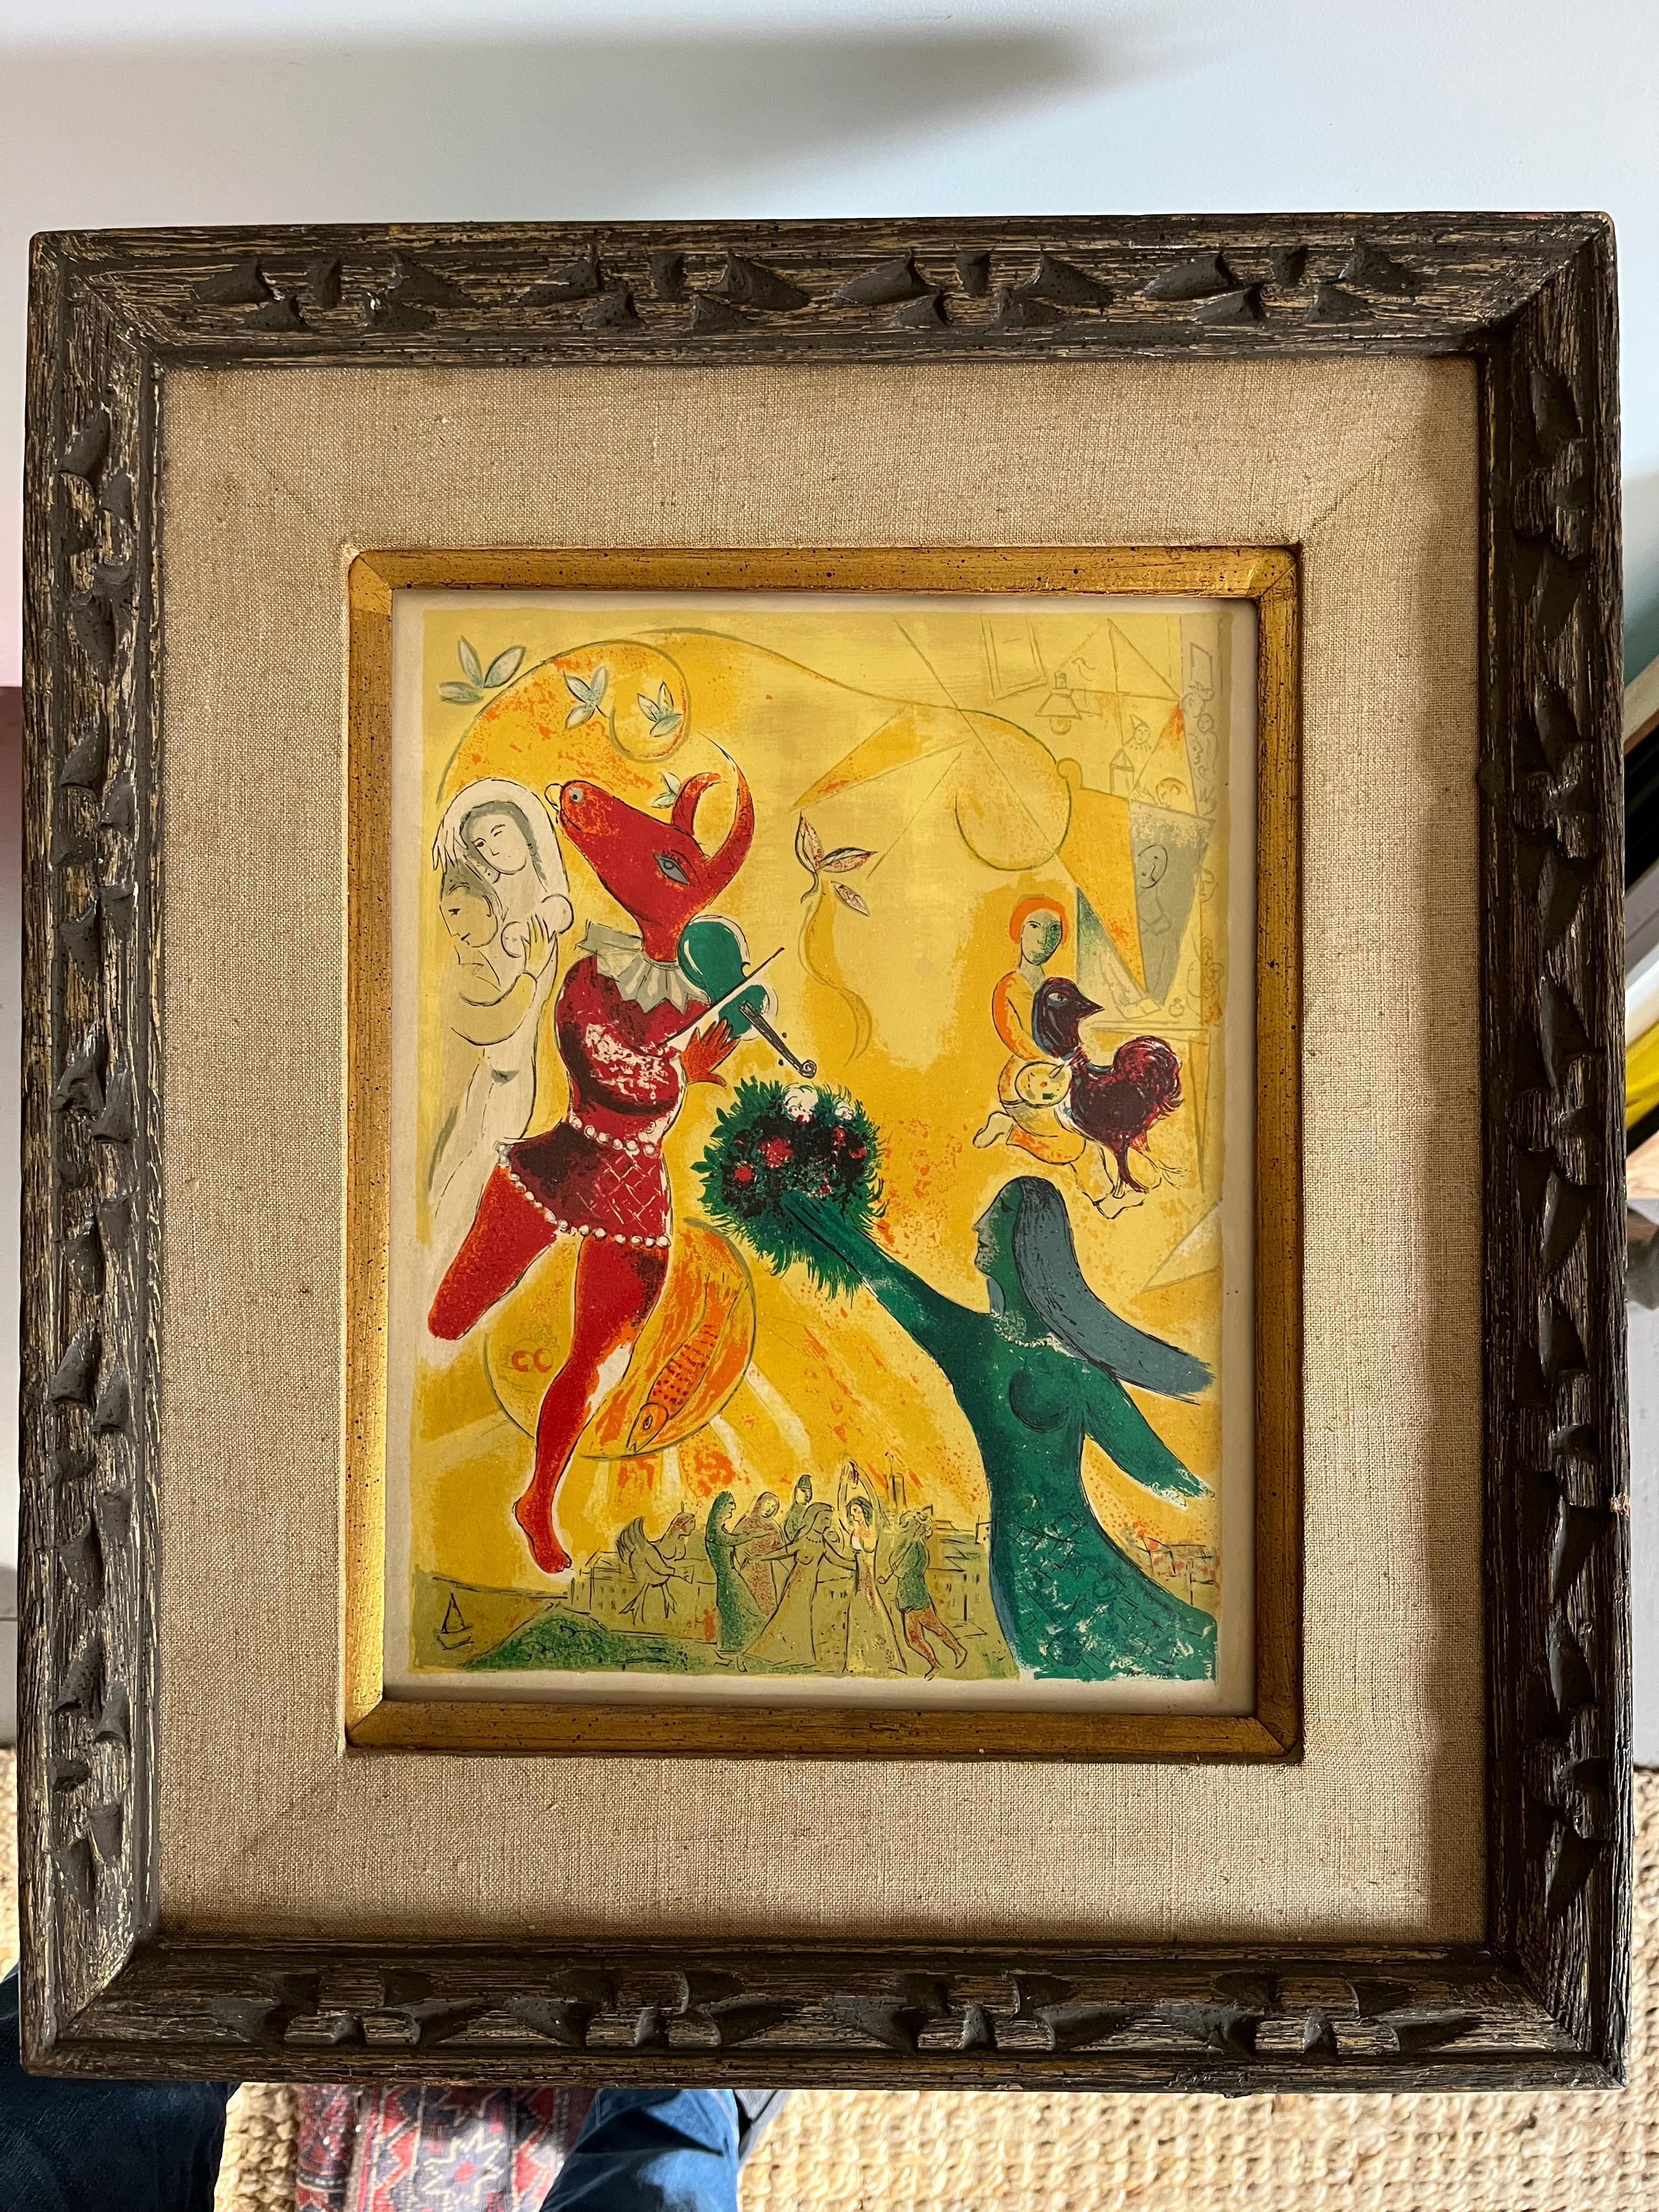 An original lithograph by Marc Chagall, titled “The Dance” circa 1950, signed in the plate. 
The size of the image is 10” w x 13.5” h
In a period frame, matted, behind glass. 
Note on reverse indicates title is “Homage to Music”